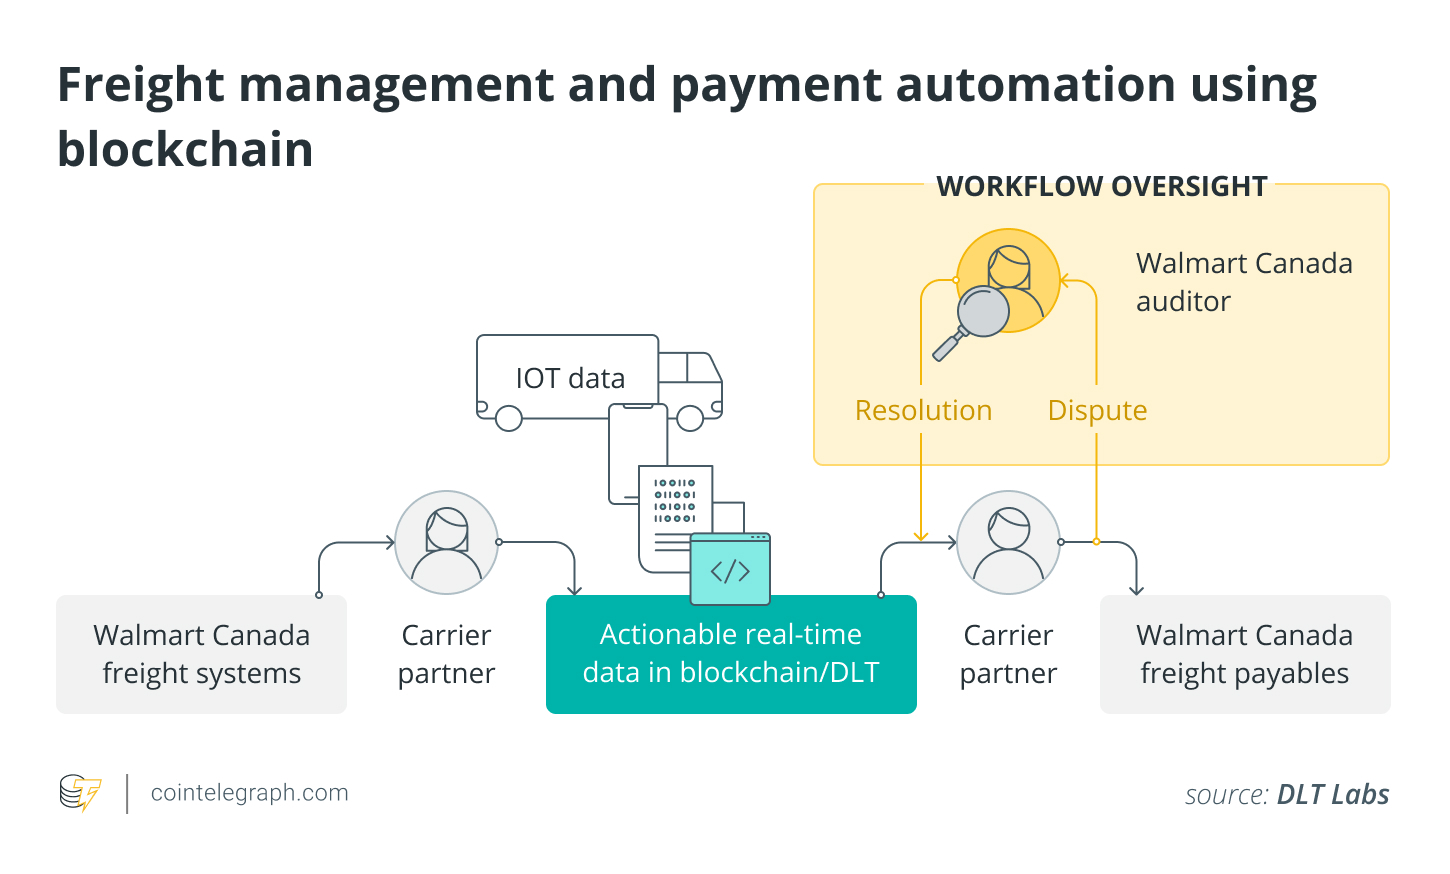 Freight management and payment automation using blockchain